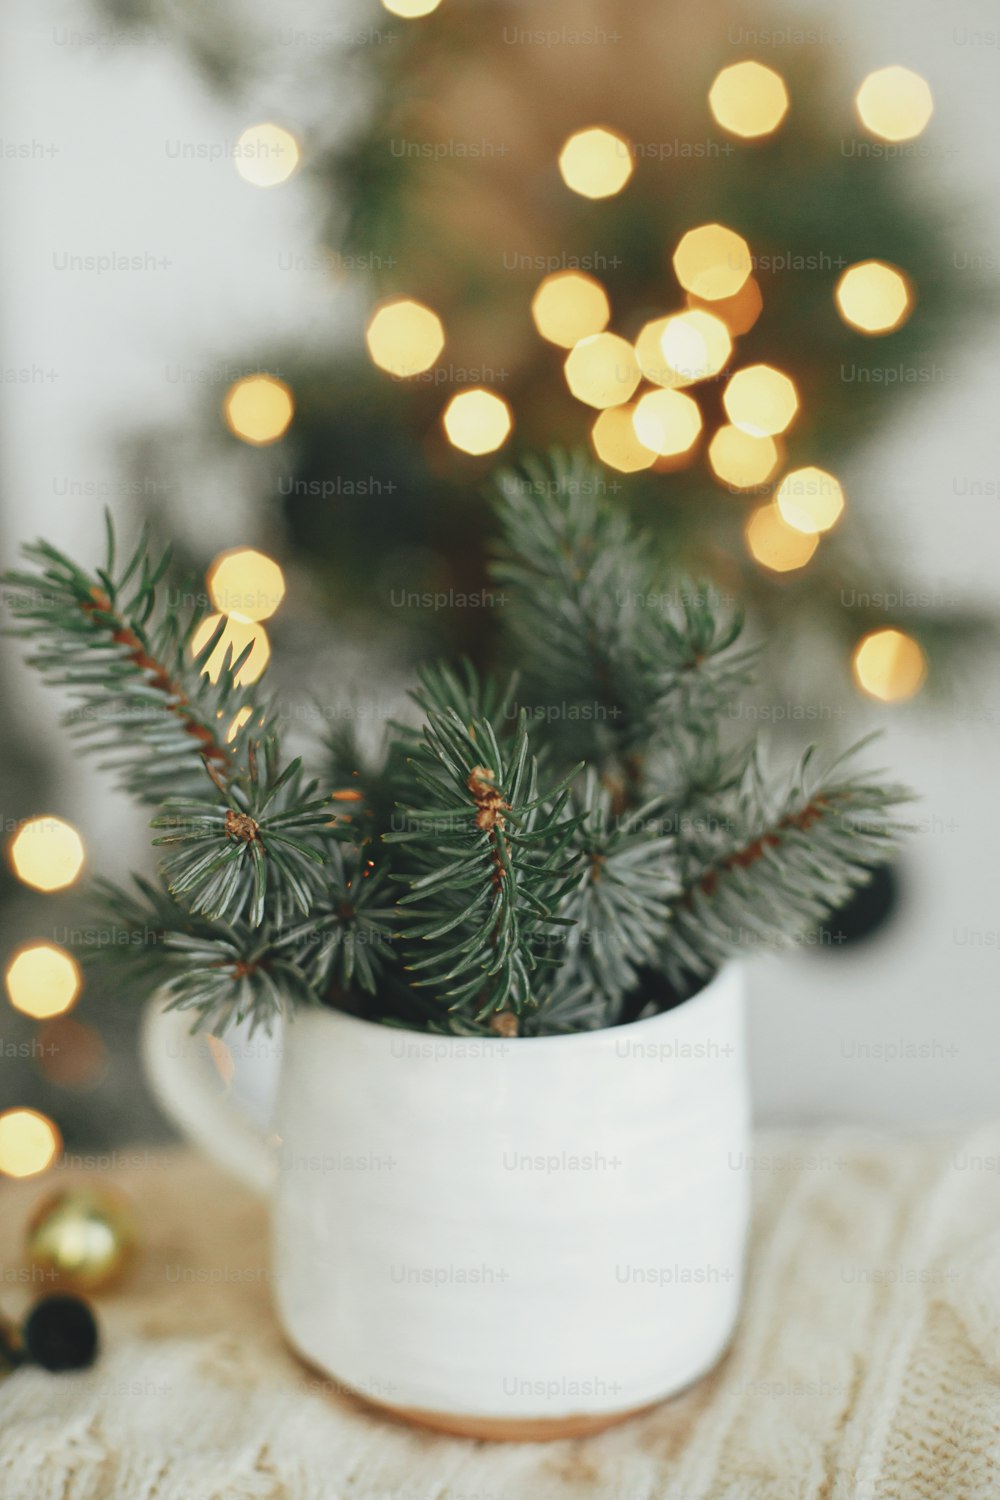 Atmospheric hygge home. Merry Christmas! Stylish cup with fir branches on cozy sweater on background of warm lights in festive scandinavian room. Magic winter time. Happy Holidays!